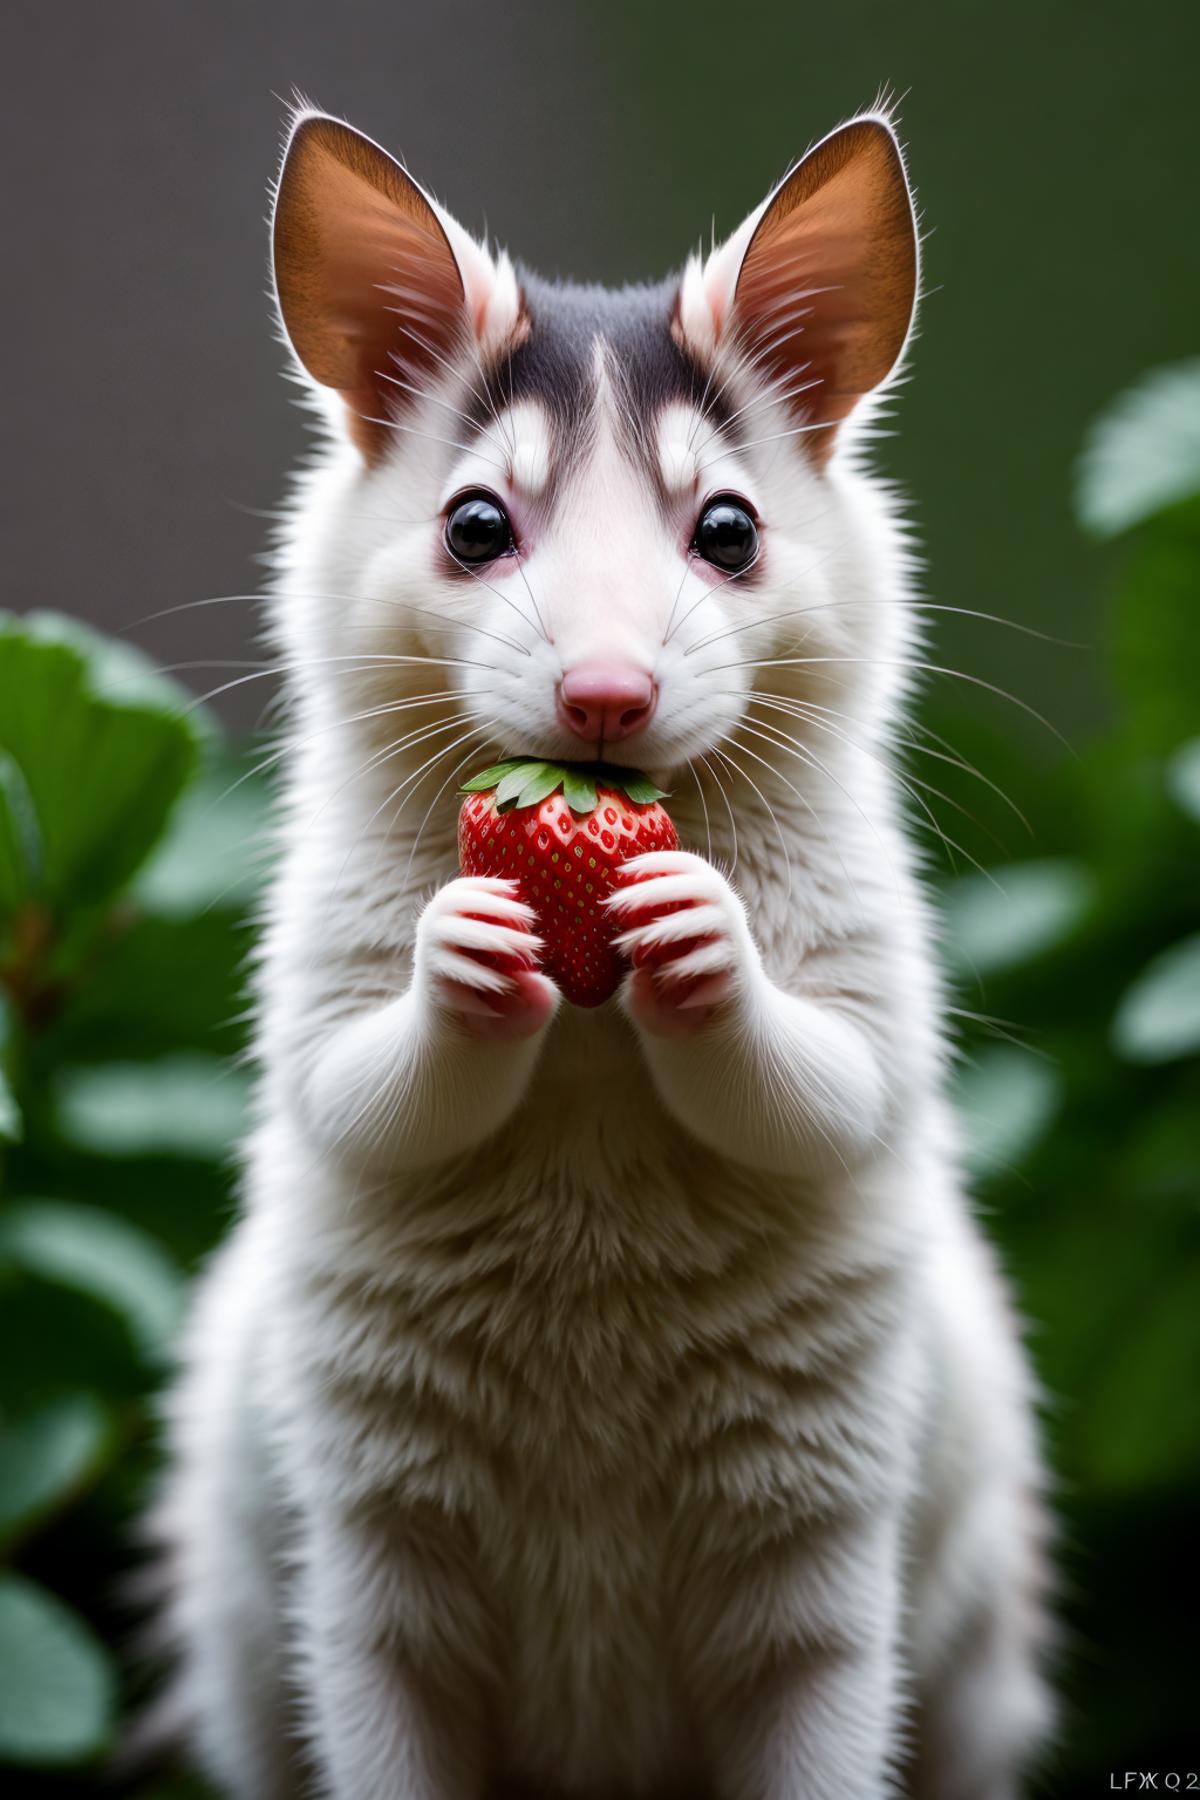 A white and black furry mouse eating a strawberry.